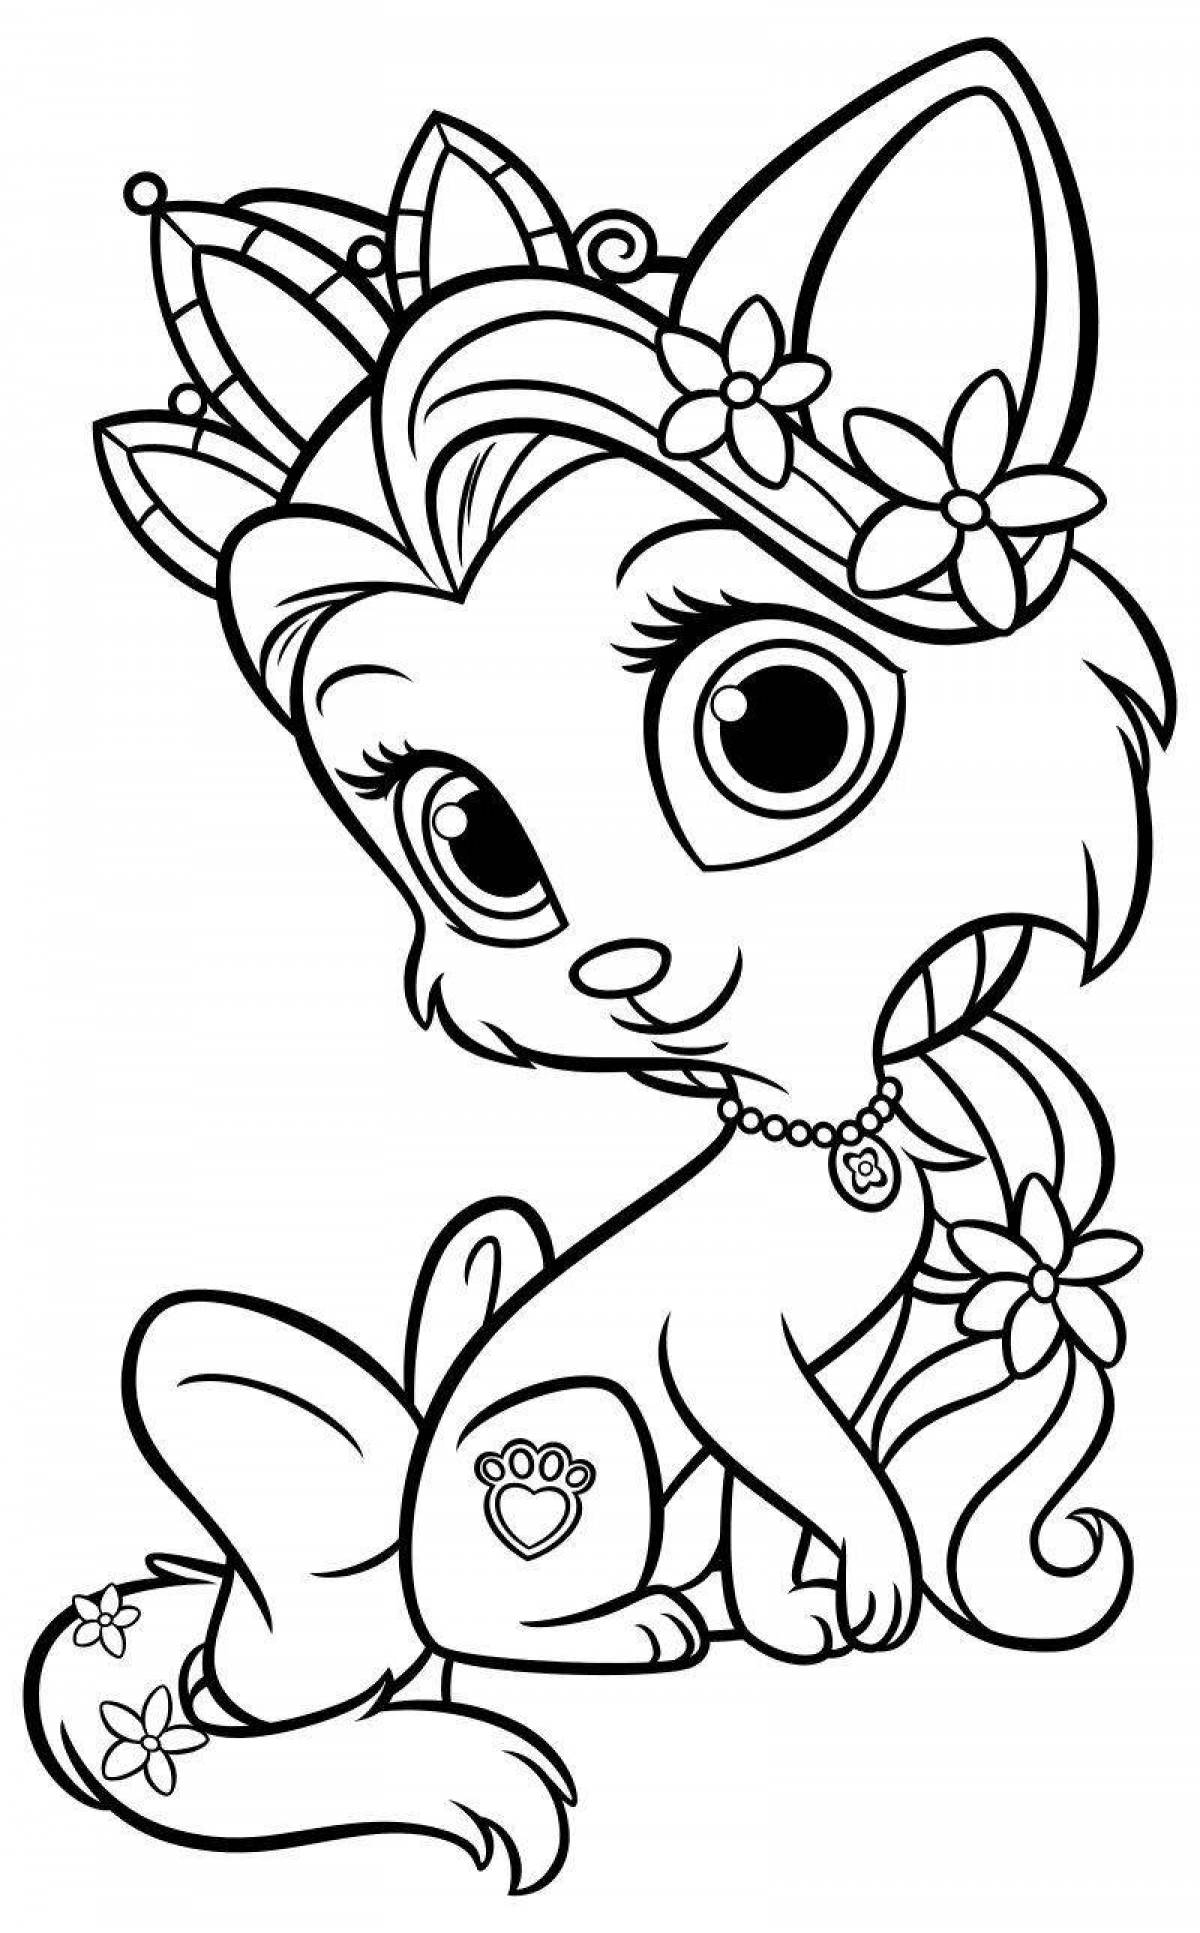 Colorful pussy coloring page